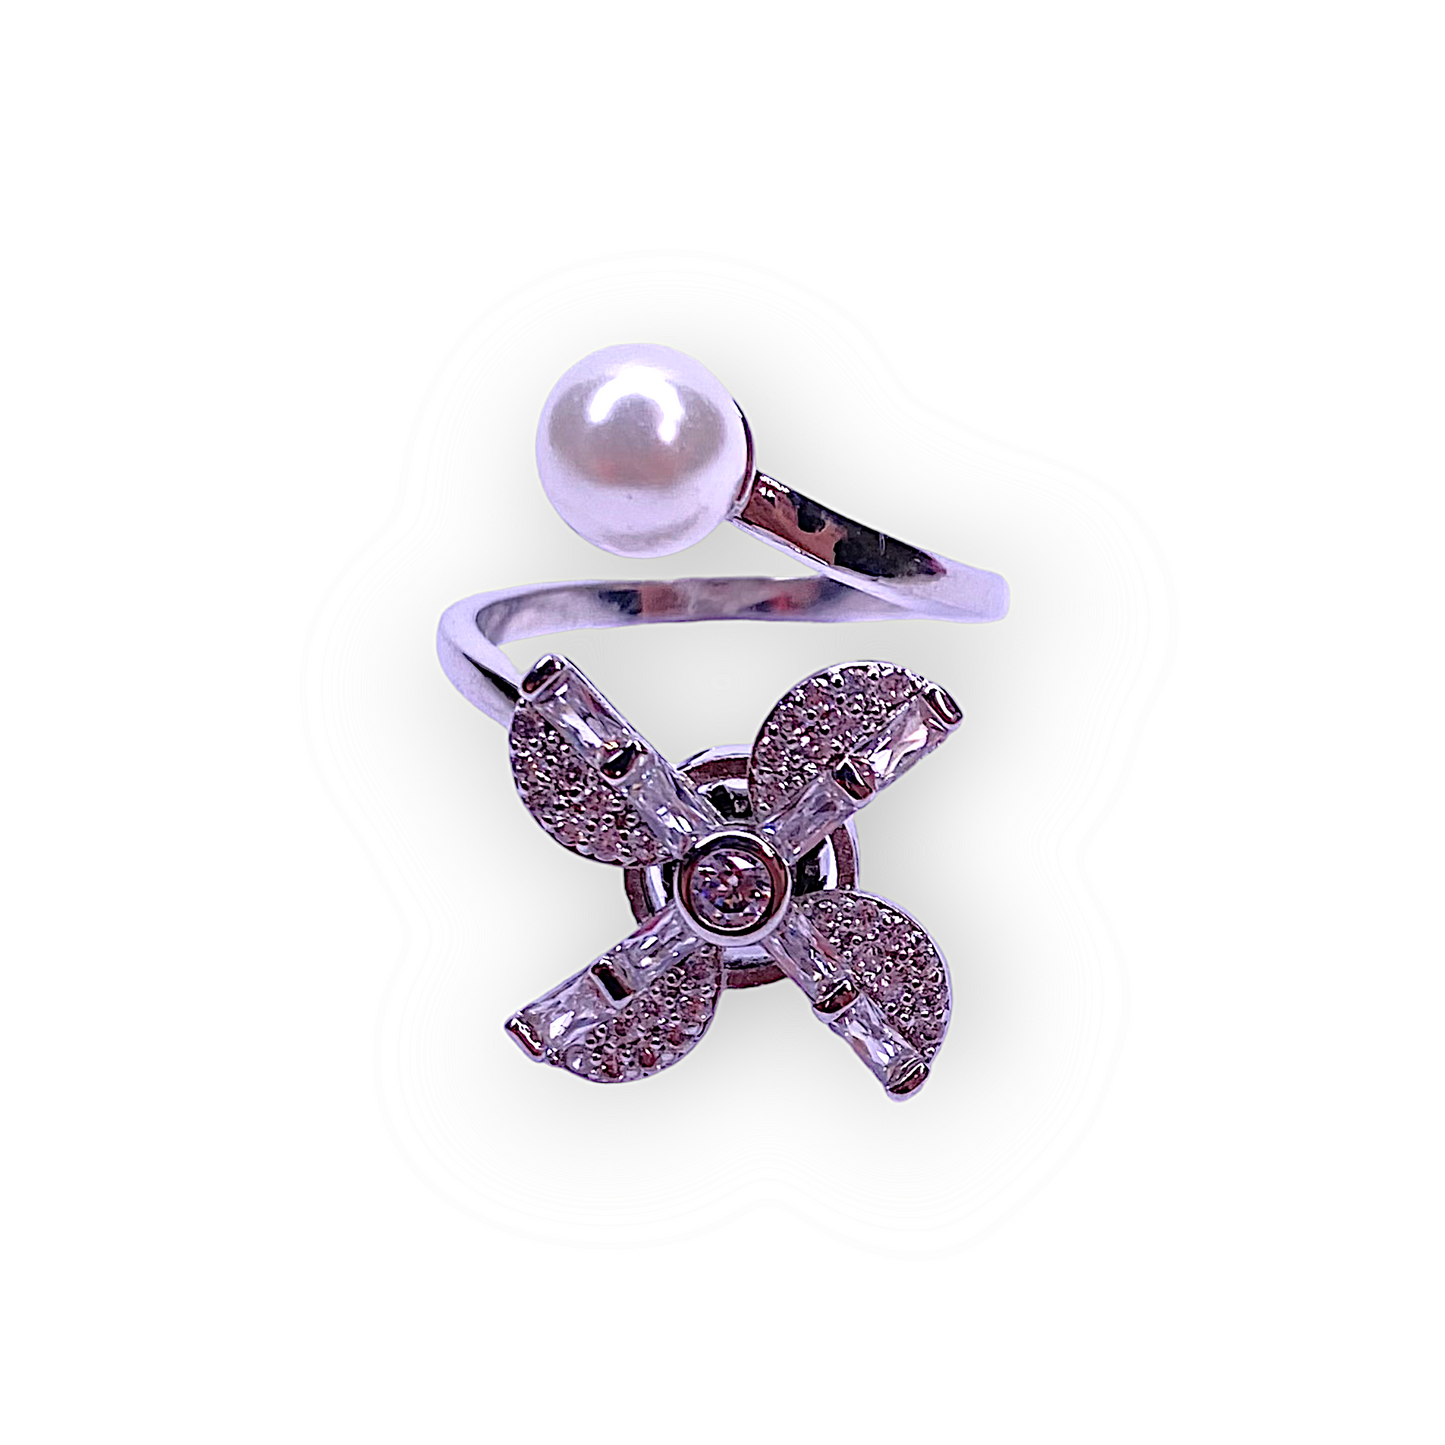 Elegant Windmill Configuration Pearl Ring For Ladies